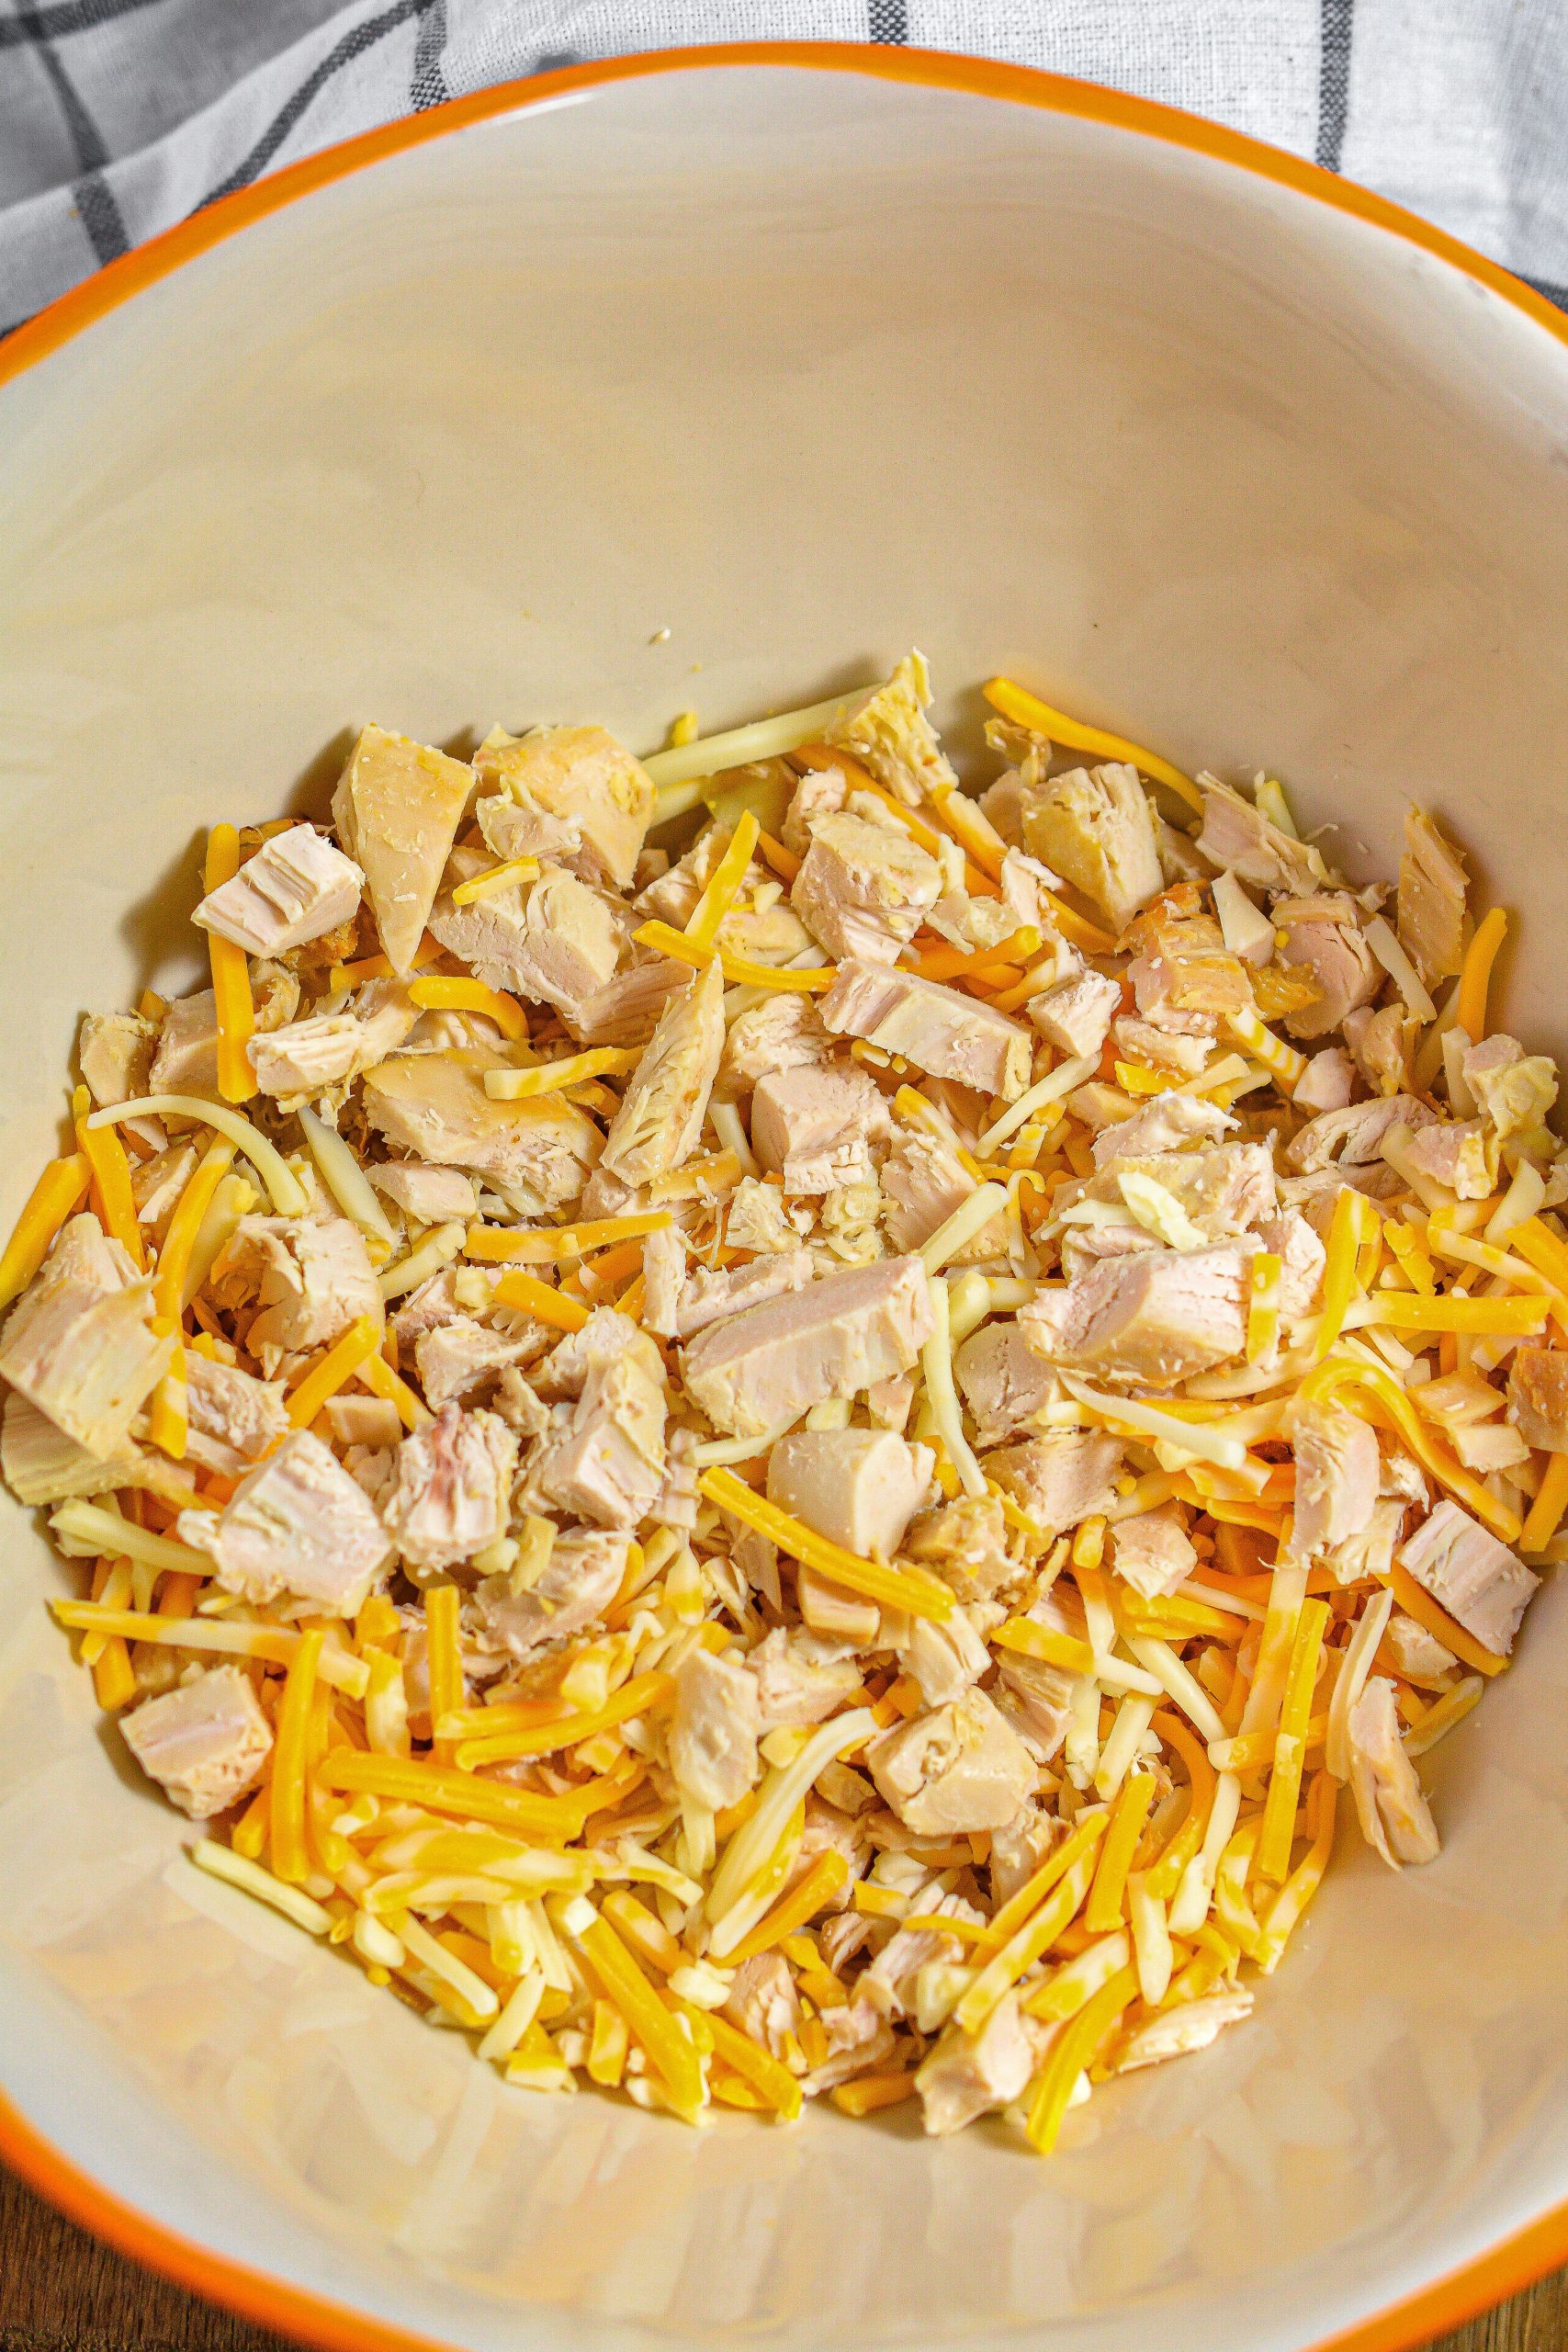 Add the chicken, 1 cup of cheese, and salt and pepper to taste in a mixing bowl